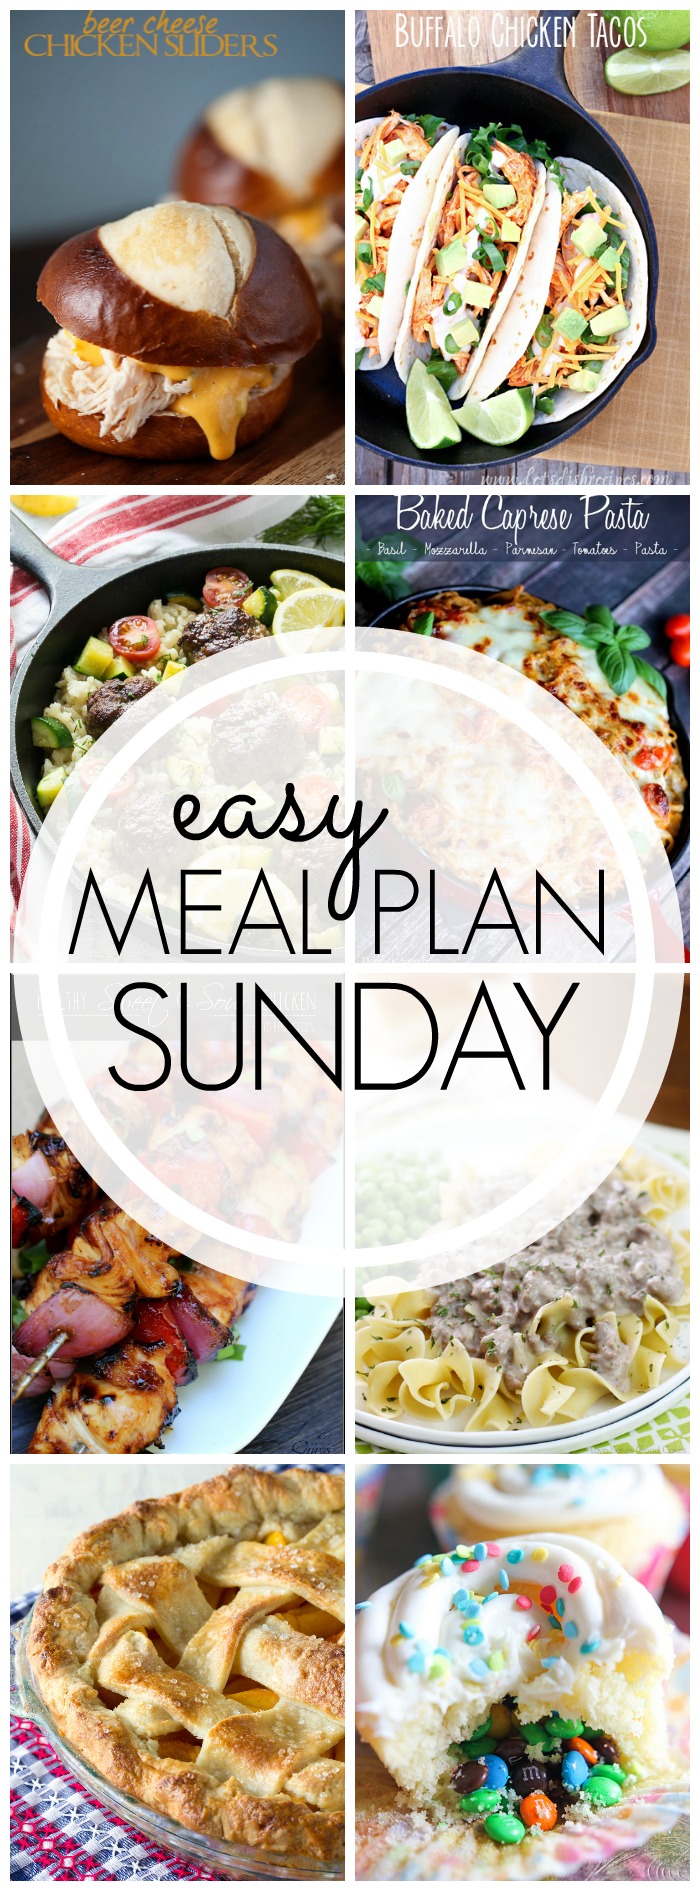 Easy Meal Plan Sunday #53